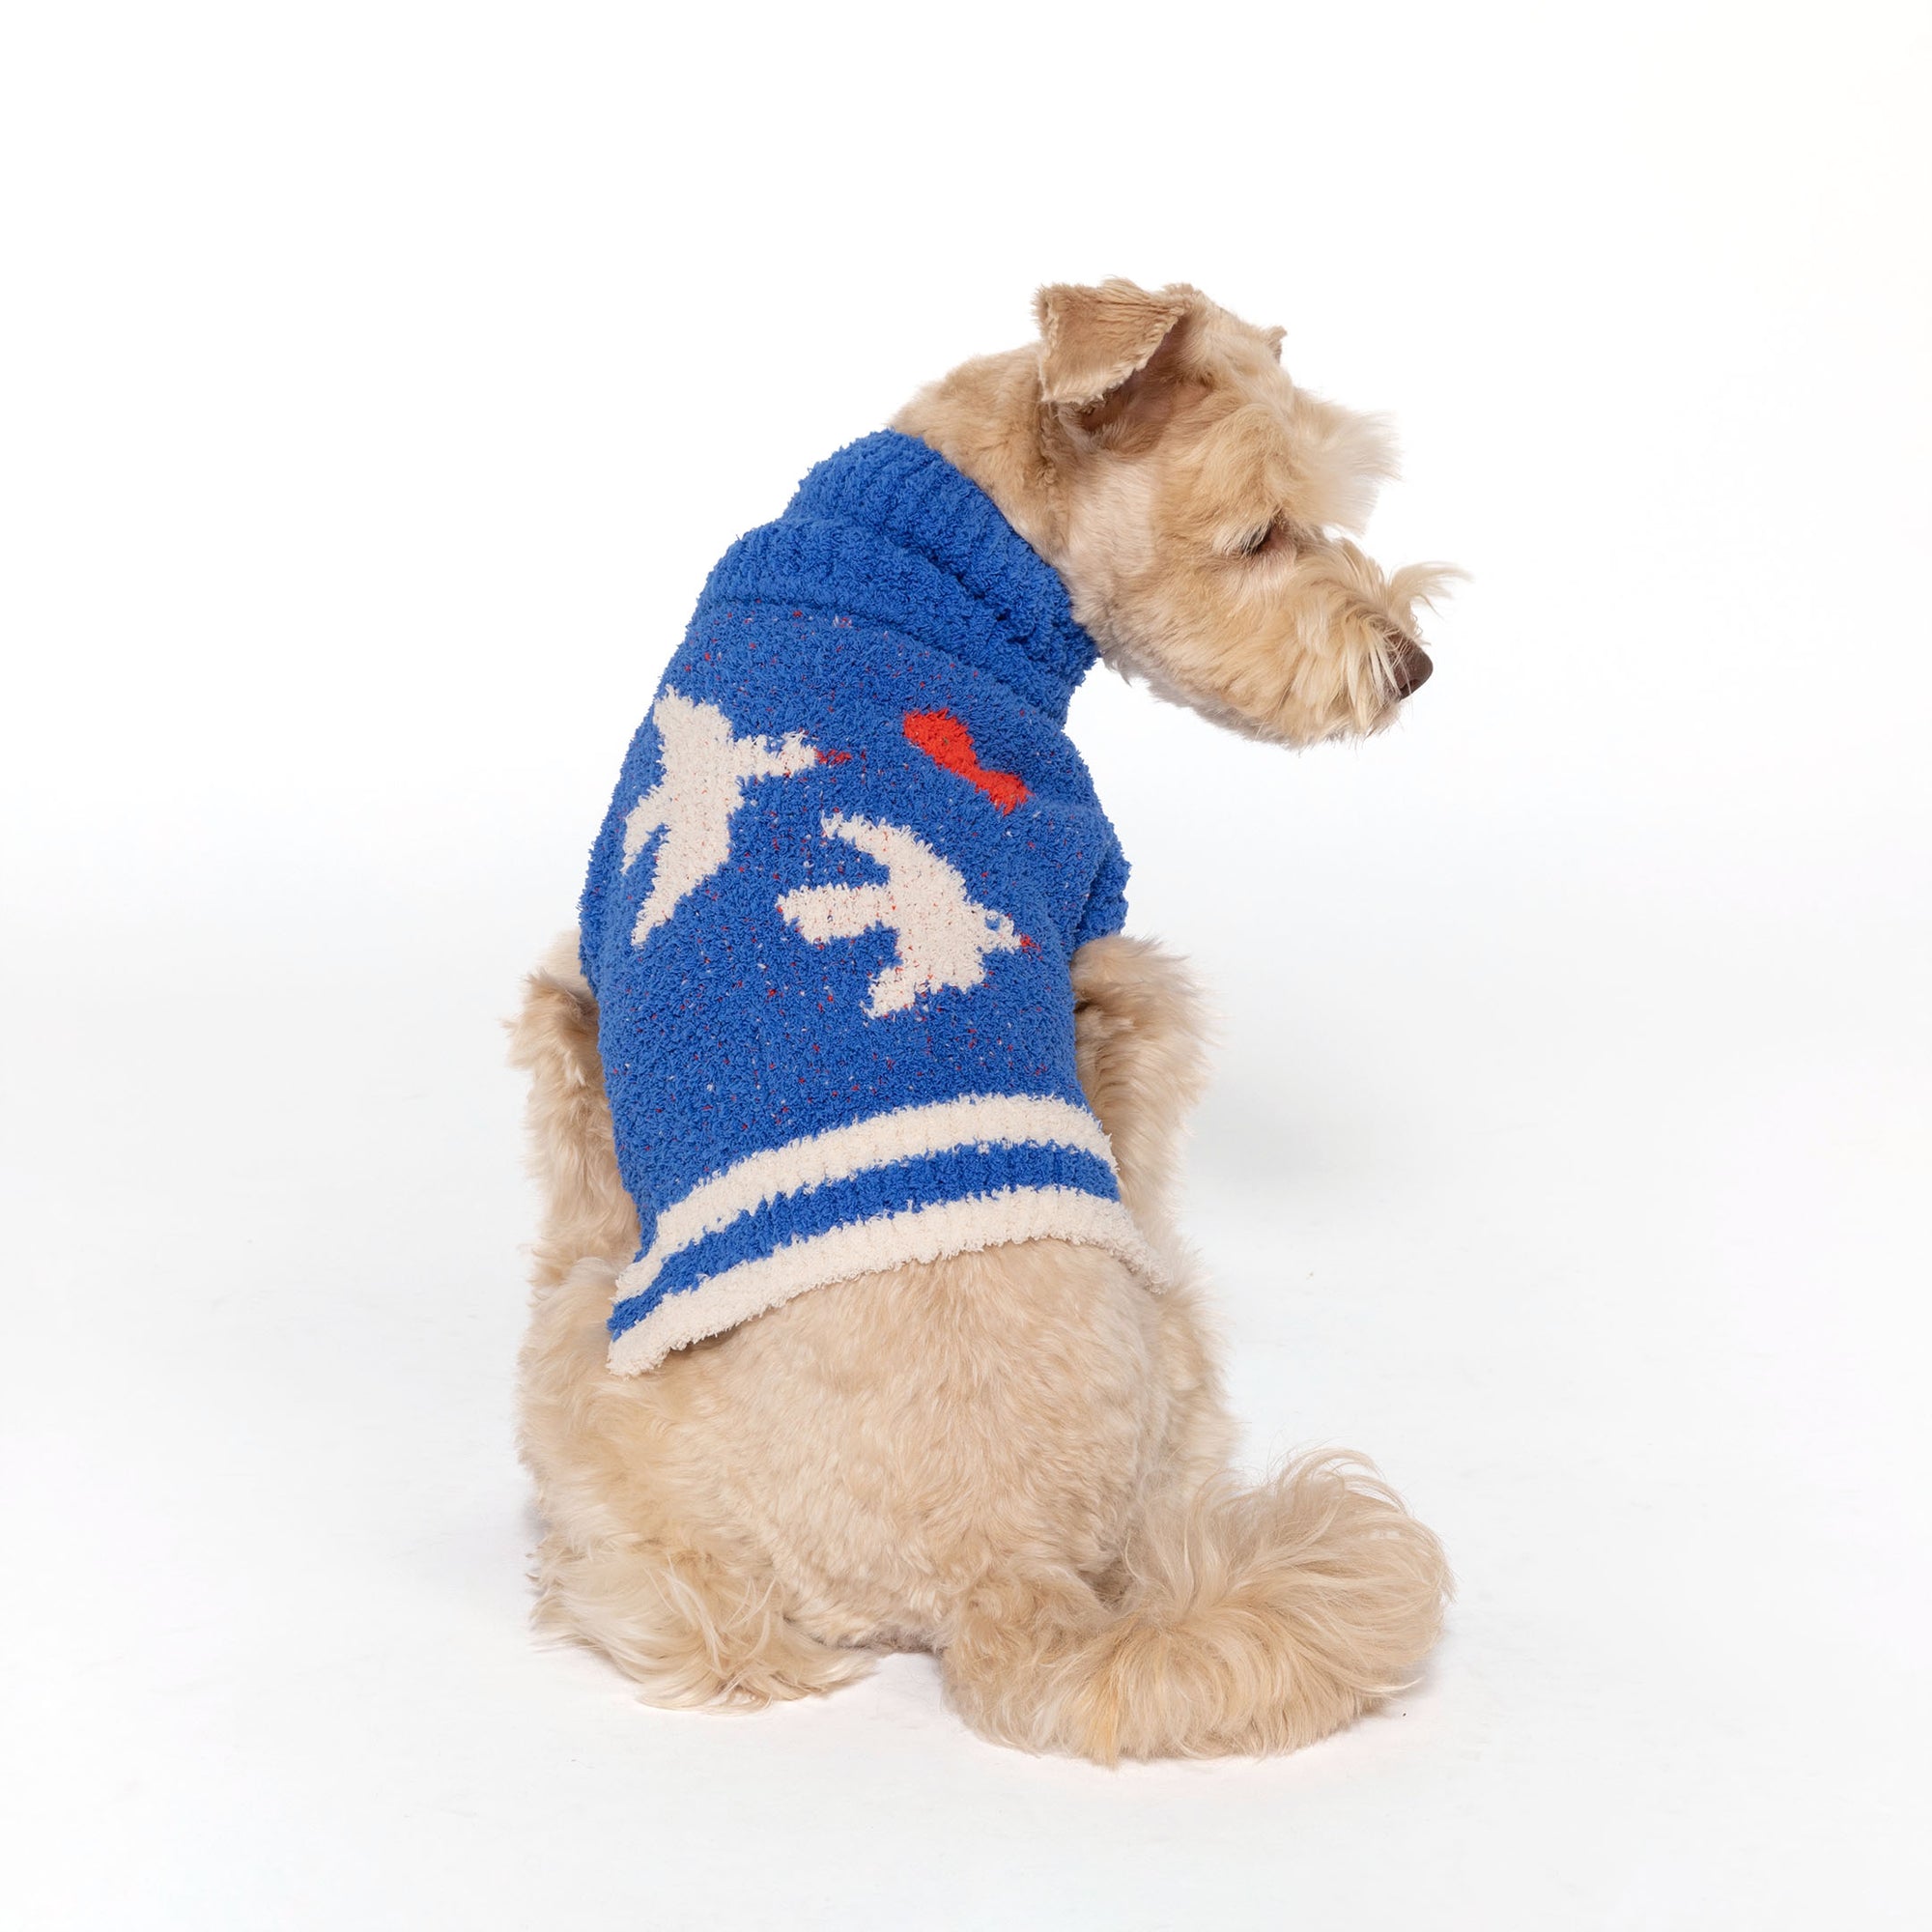 Dog in a blue "The Furryfolks" love birds sweater, gazing to the side, on a white background.